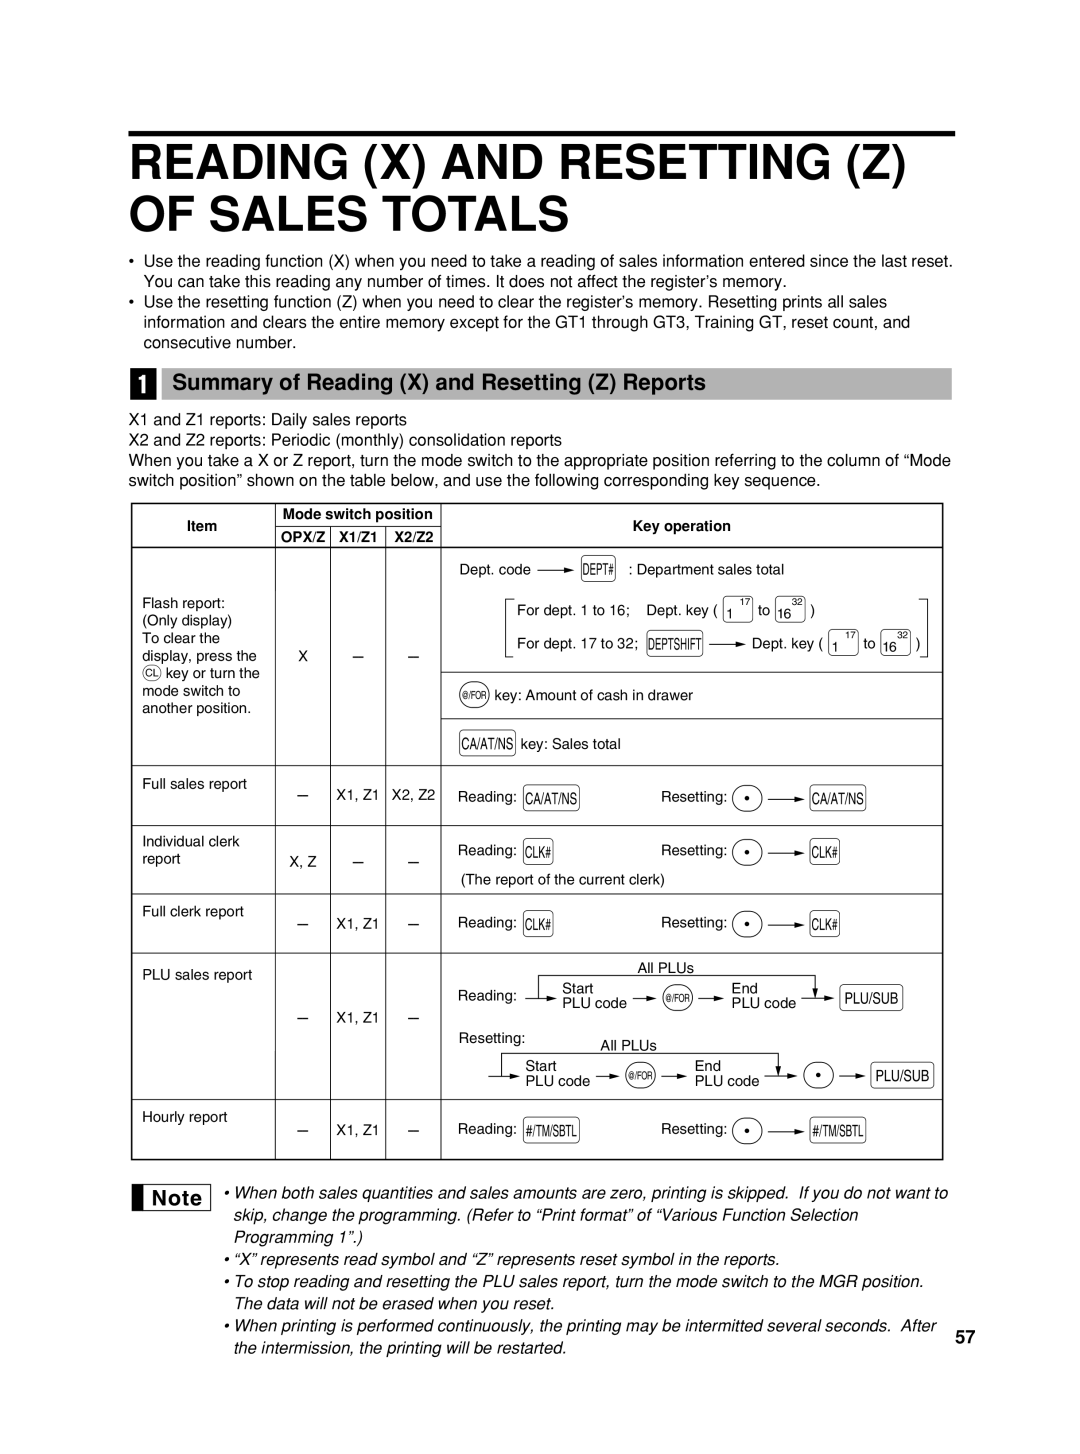 Sharp TINSZ2600RCZZ Reading X And Resetting Z Of Sales Totals, Summary of Reading X and Resetting Z Reports 